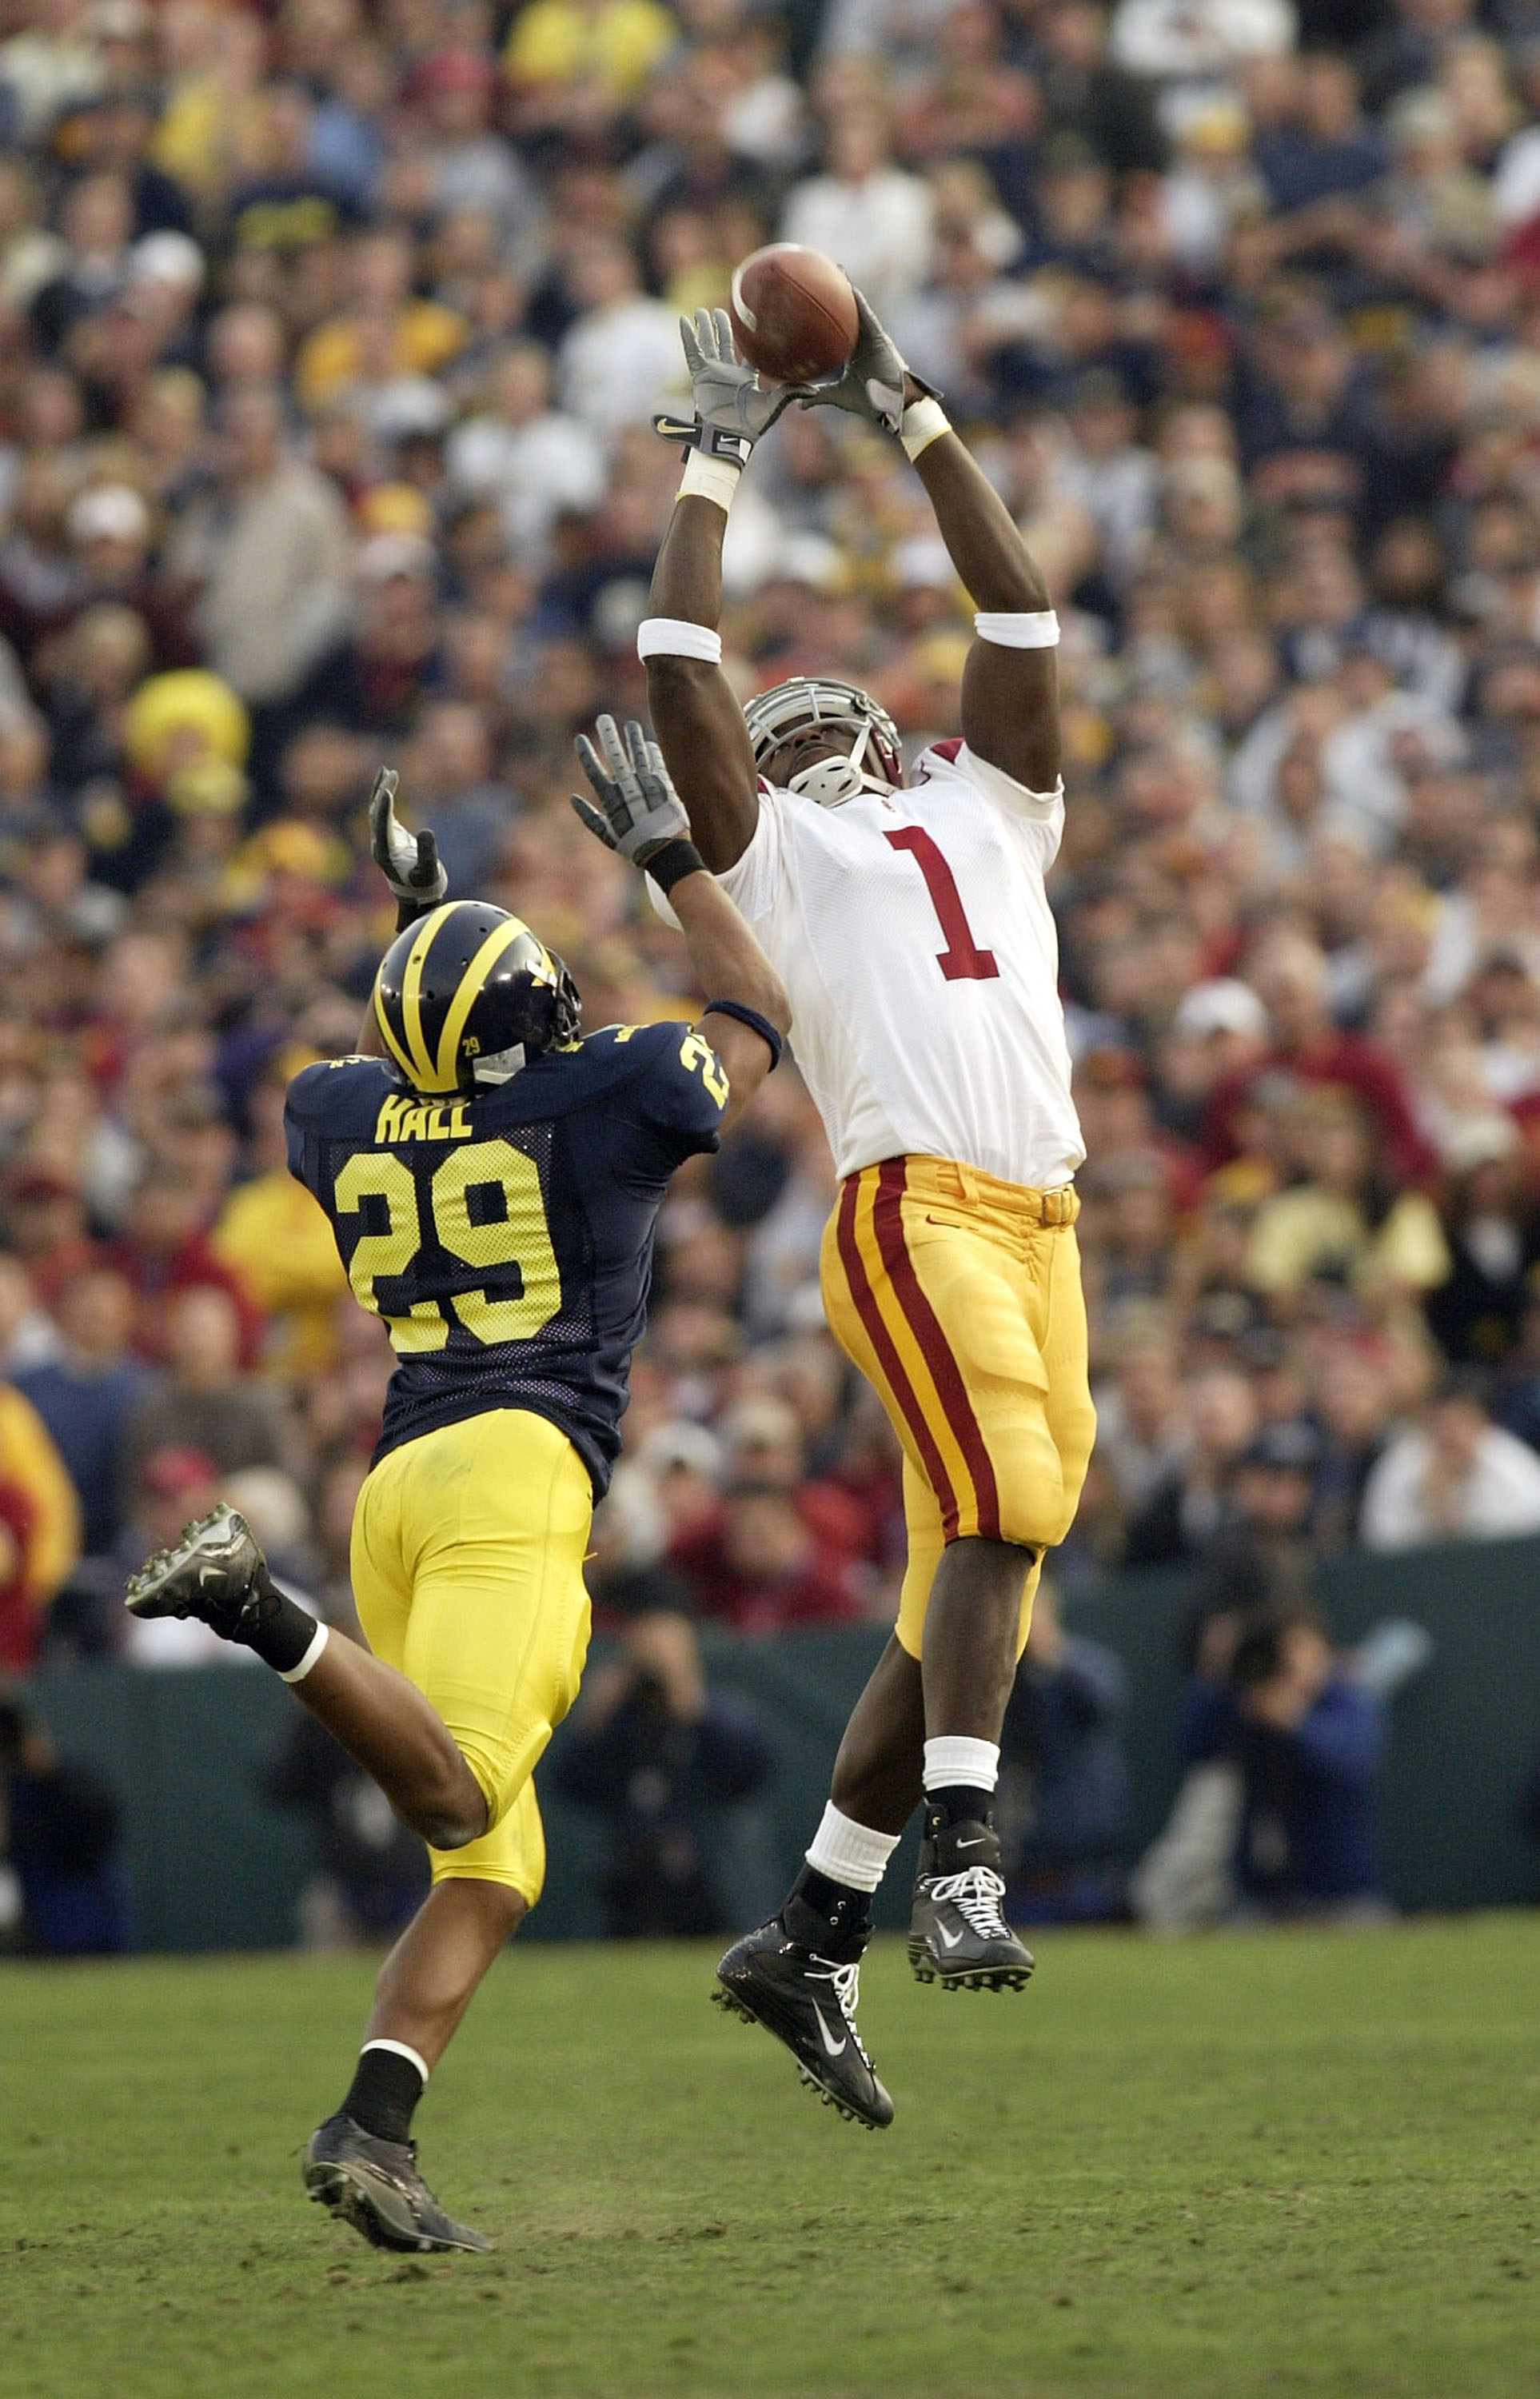 PASADENA, CA - JANUARY 1:  Wide receiver Mike Williams #1 of the USC Trojans makes a catch in front of cornerback Leon Hall of the Michigan Wolverines in the 2004 Rose Bowl on January 1, 2004 at the Rose Bowl in Pasadena, California. USC defeated Michigan